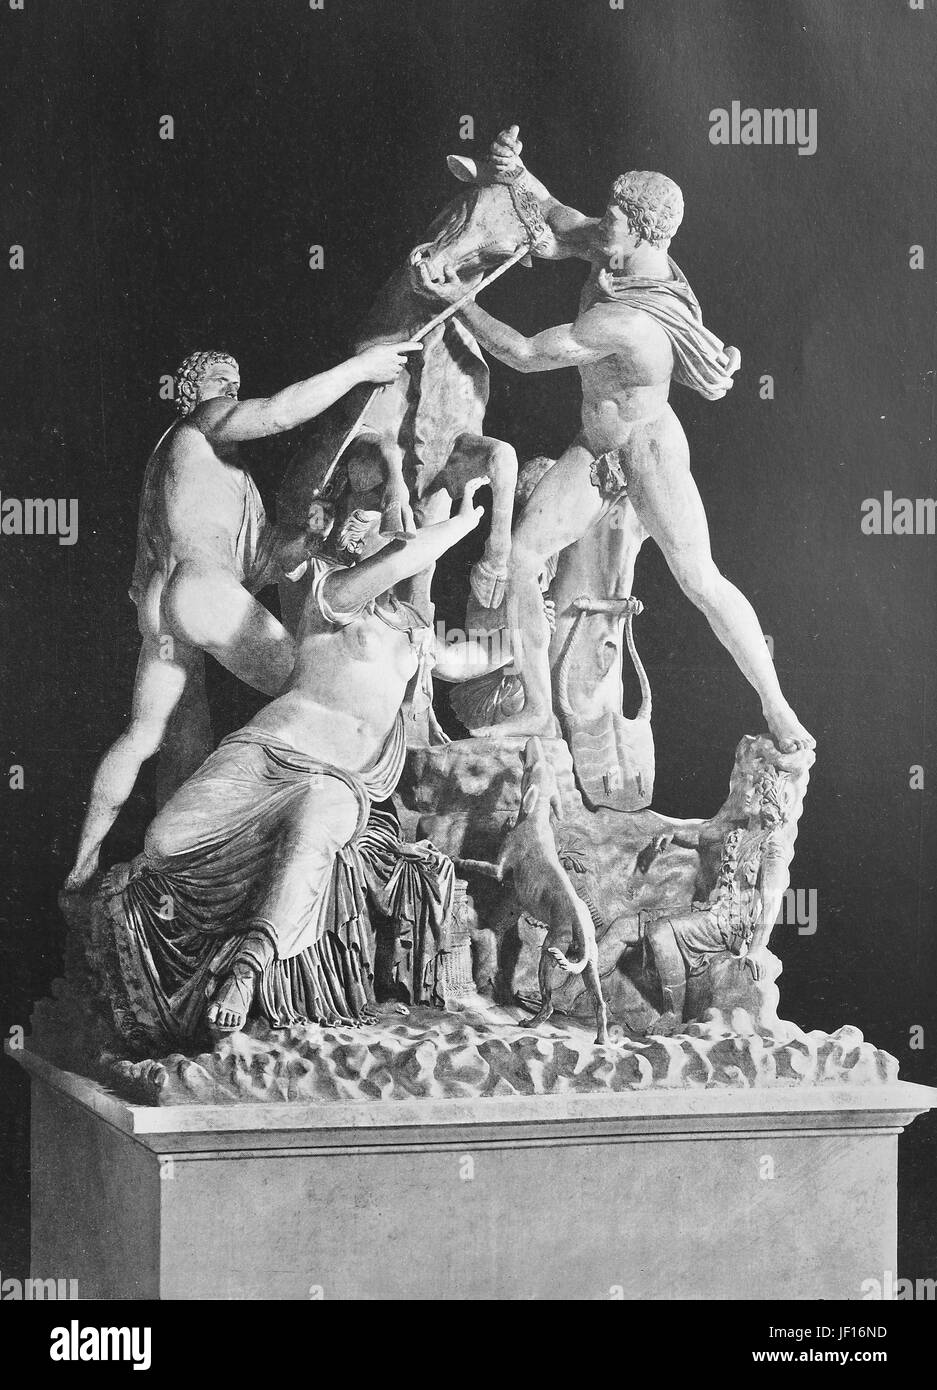 Historical image of The Farnese Bull, Toro Farnese, formerly in the Farnese collection in Rome, is a massive Roman elaborated copy of a Hellenistic sculpture, Neapel, Napoli, Naples, Italy,  Digital improved reproduction from an original print from 1890 Stock Photo